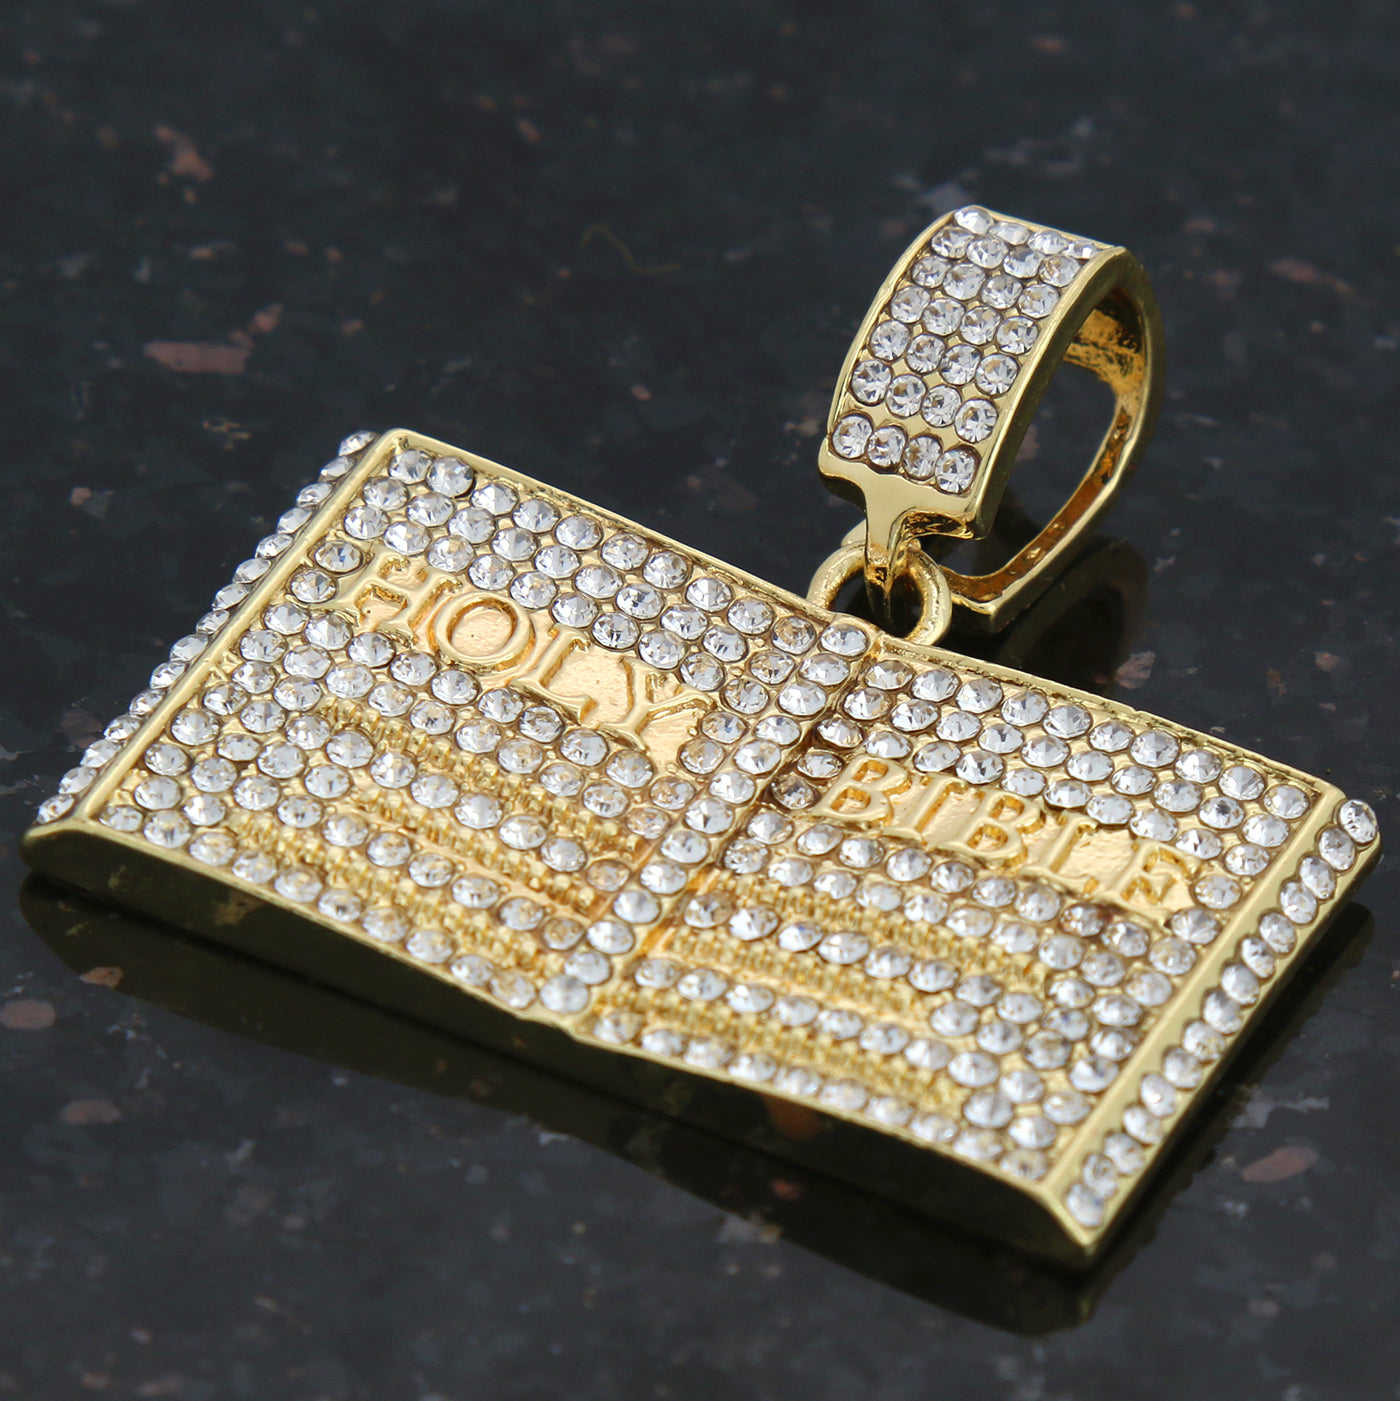 BIBLE PENDANT WITH GOLD ROPE CHAIN